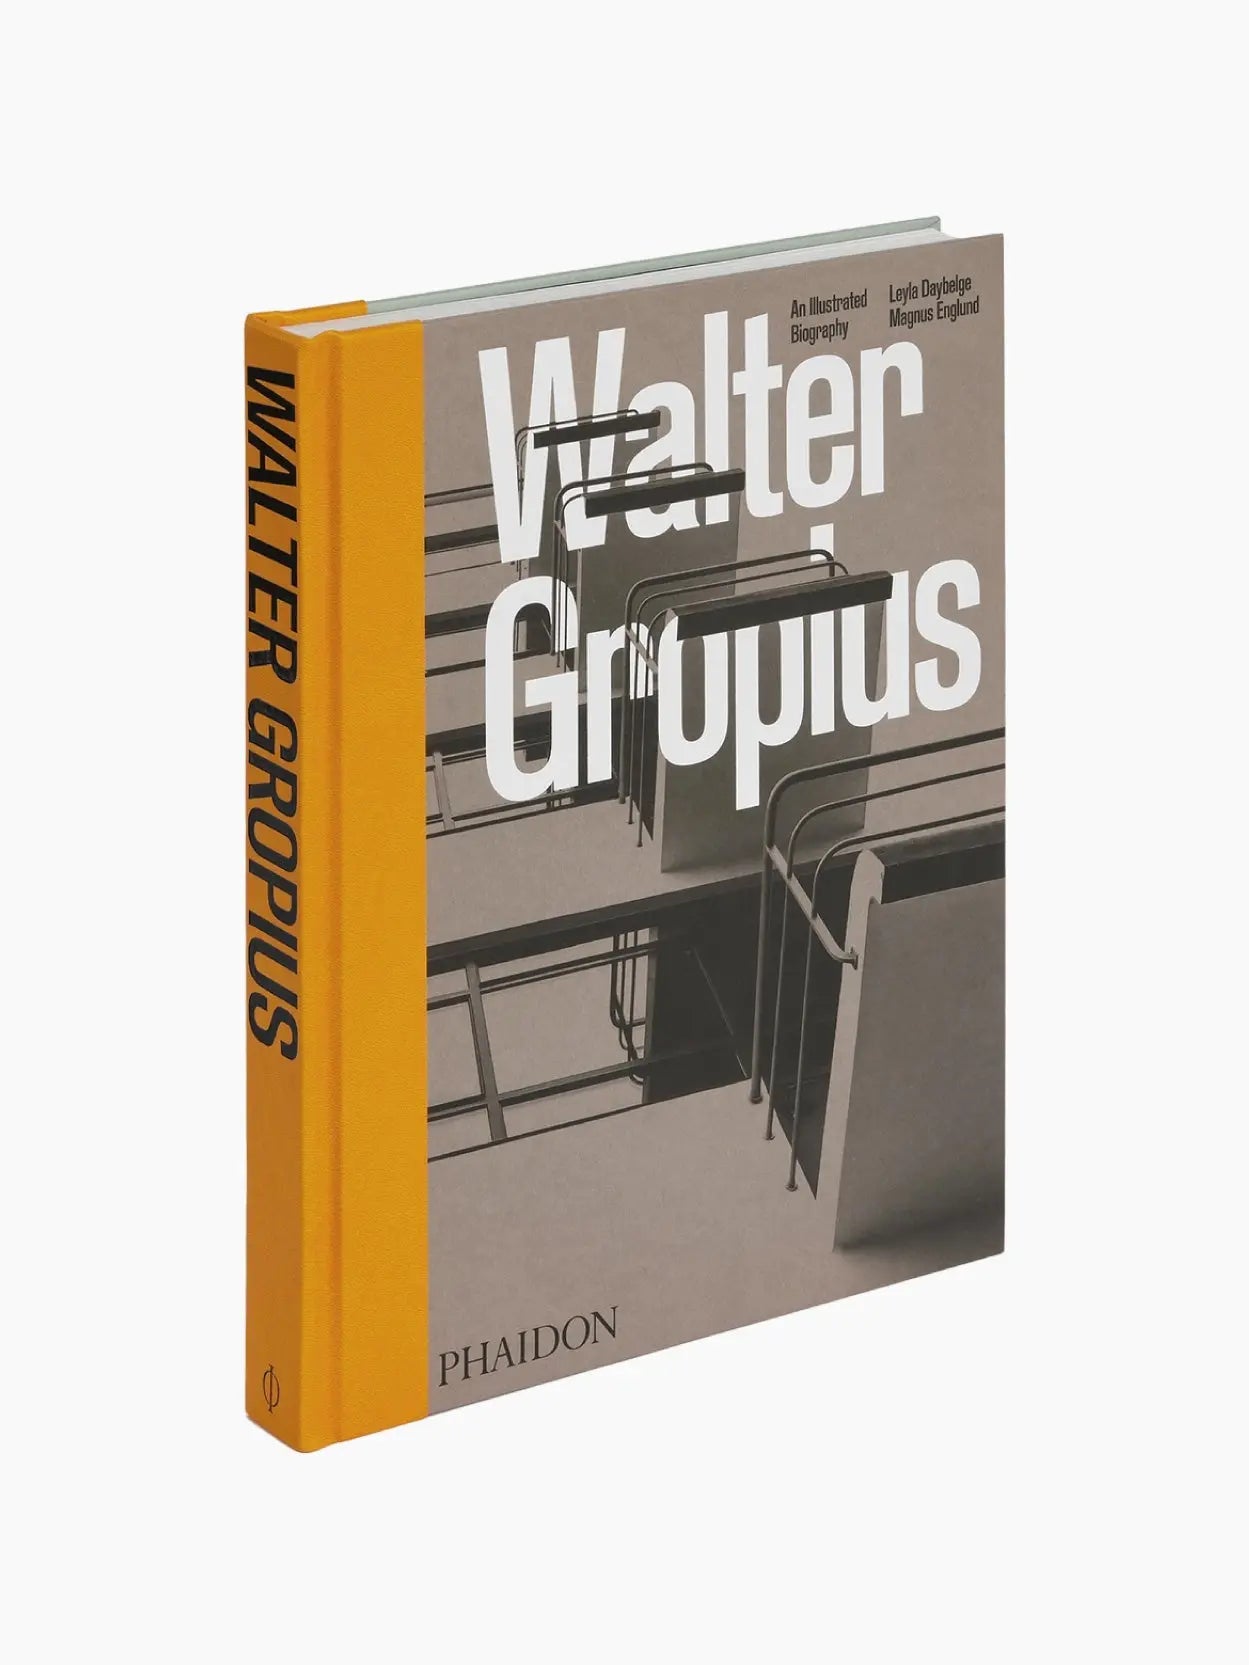 The image shows a book titled "Walter Gropius: An Illustrated Biography" with a hard cover, available at BassalStore. The spine is yellow with the title and the name "Phaidon" printed on it. The cover features a grayscale photograph of industrial-style furniture and the title in white bold letters, reminiscent of Barcelona's design ethos.